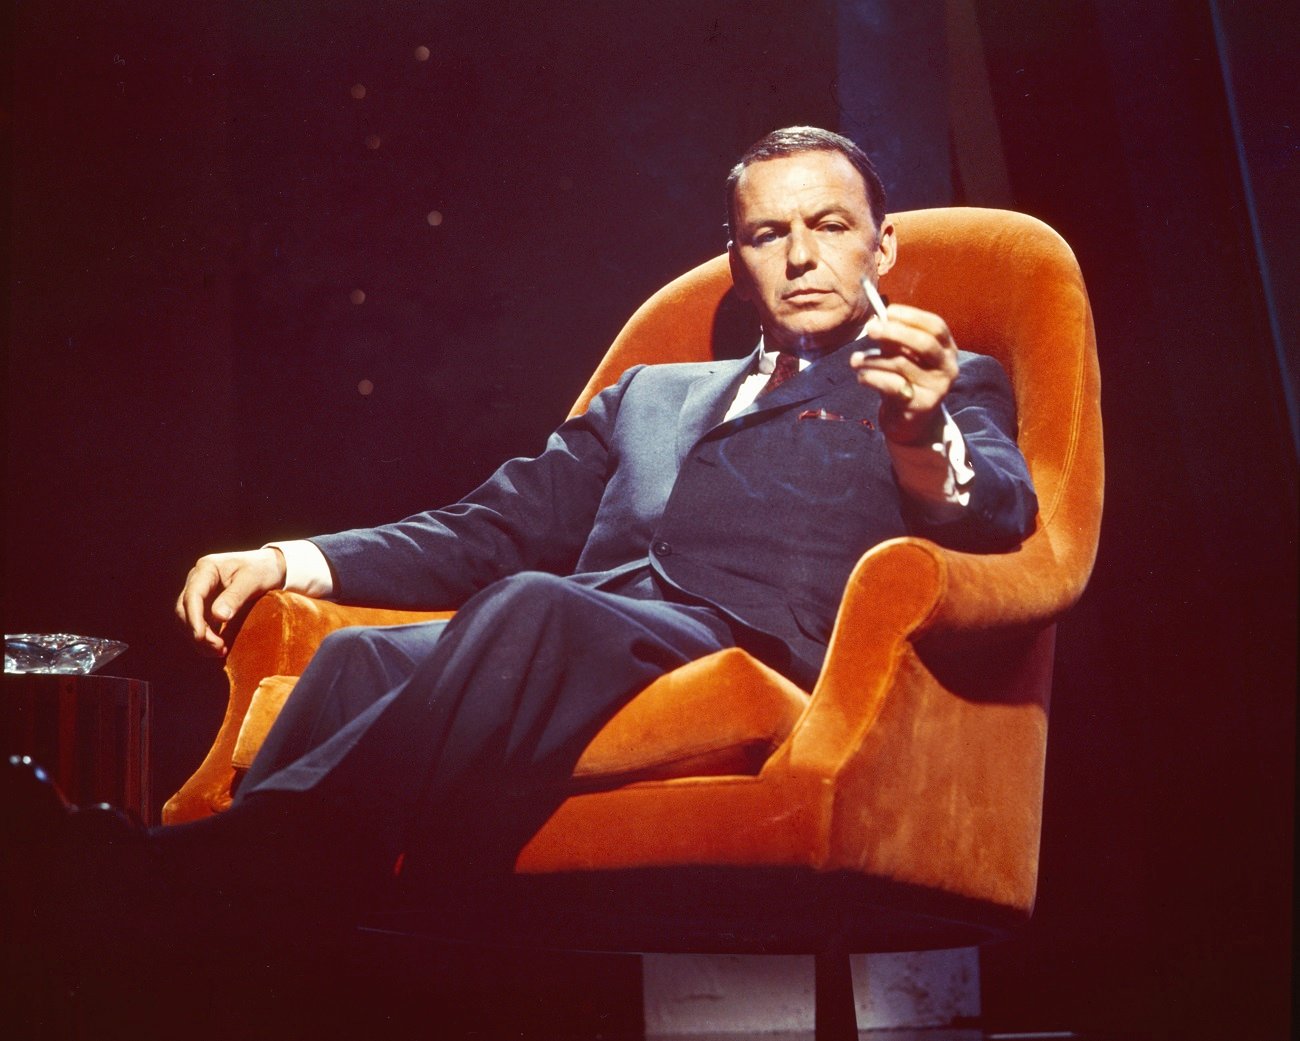 Frank Sinatra wears a suit and sits in an orange armchair. He holds a cigarette.